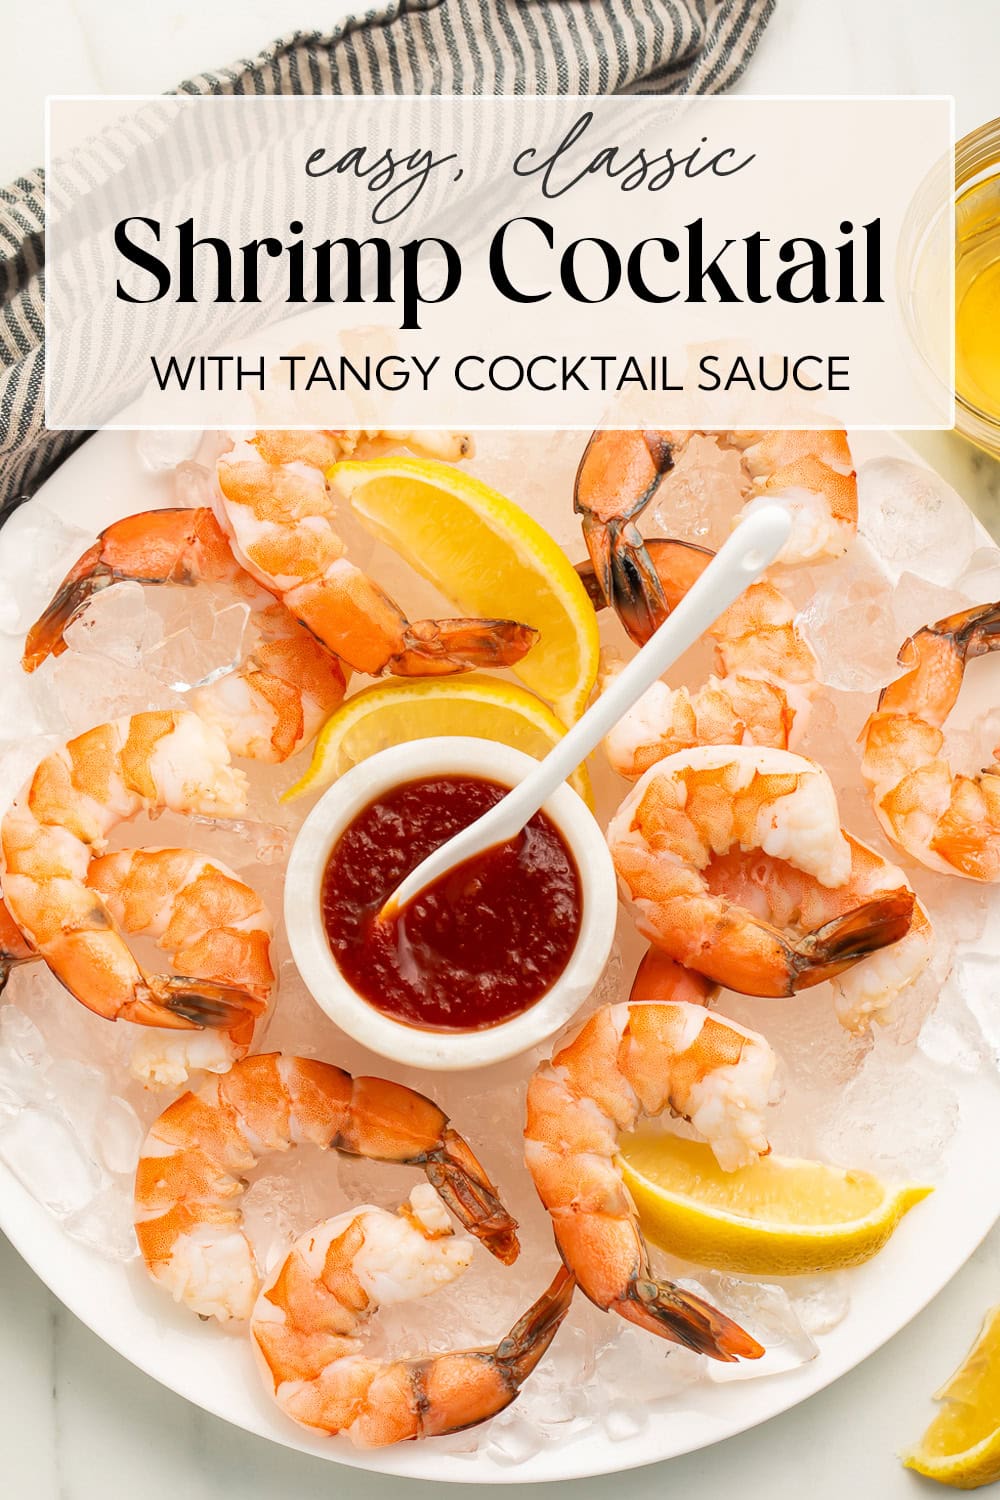 Pin graphic for shrimp cocktail.